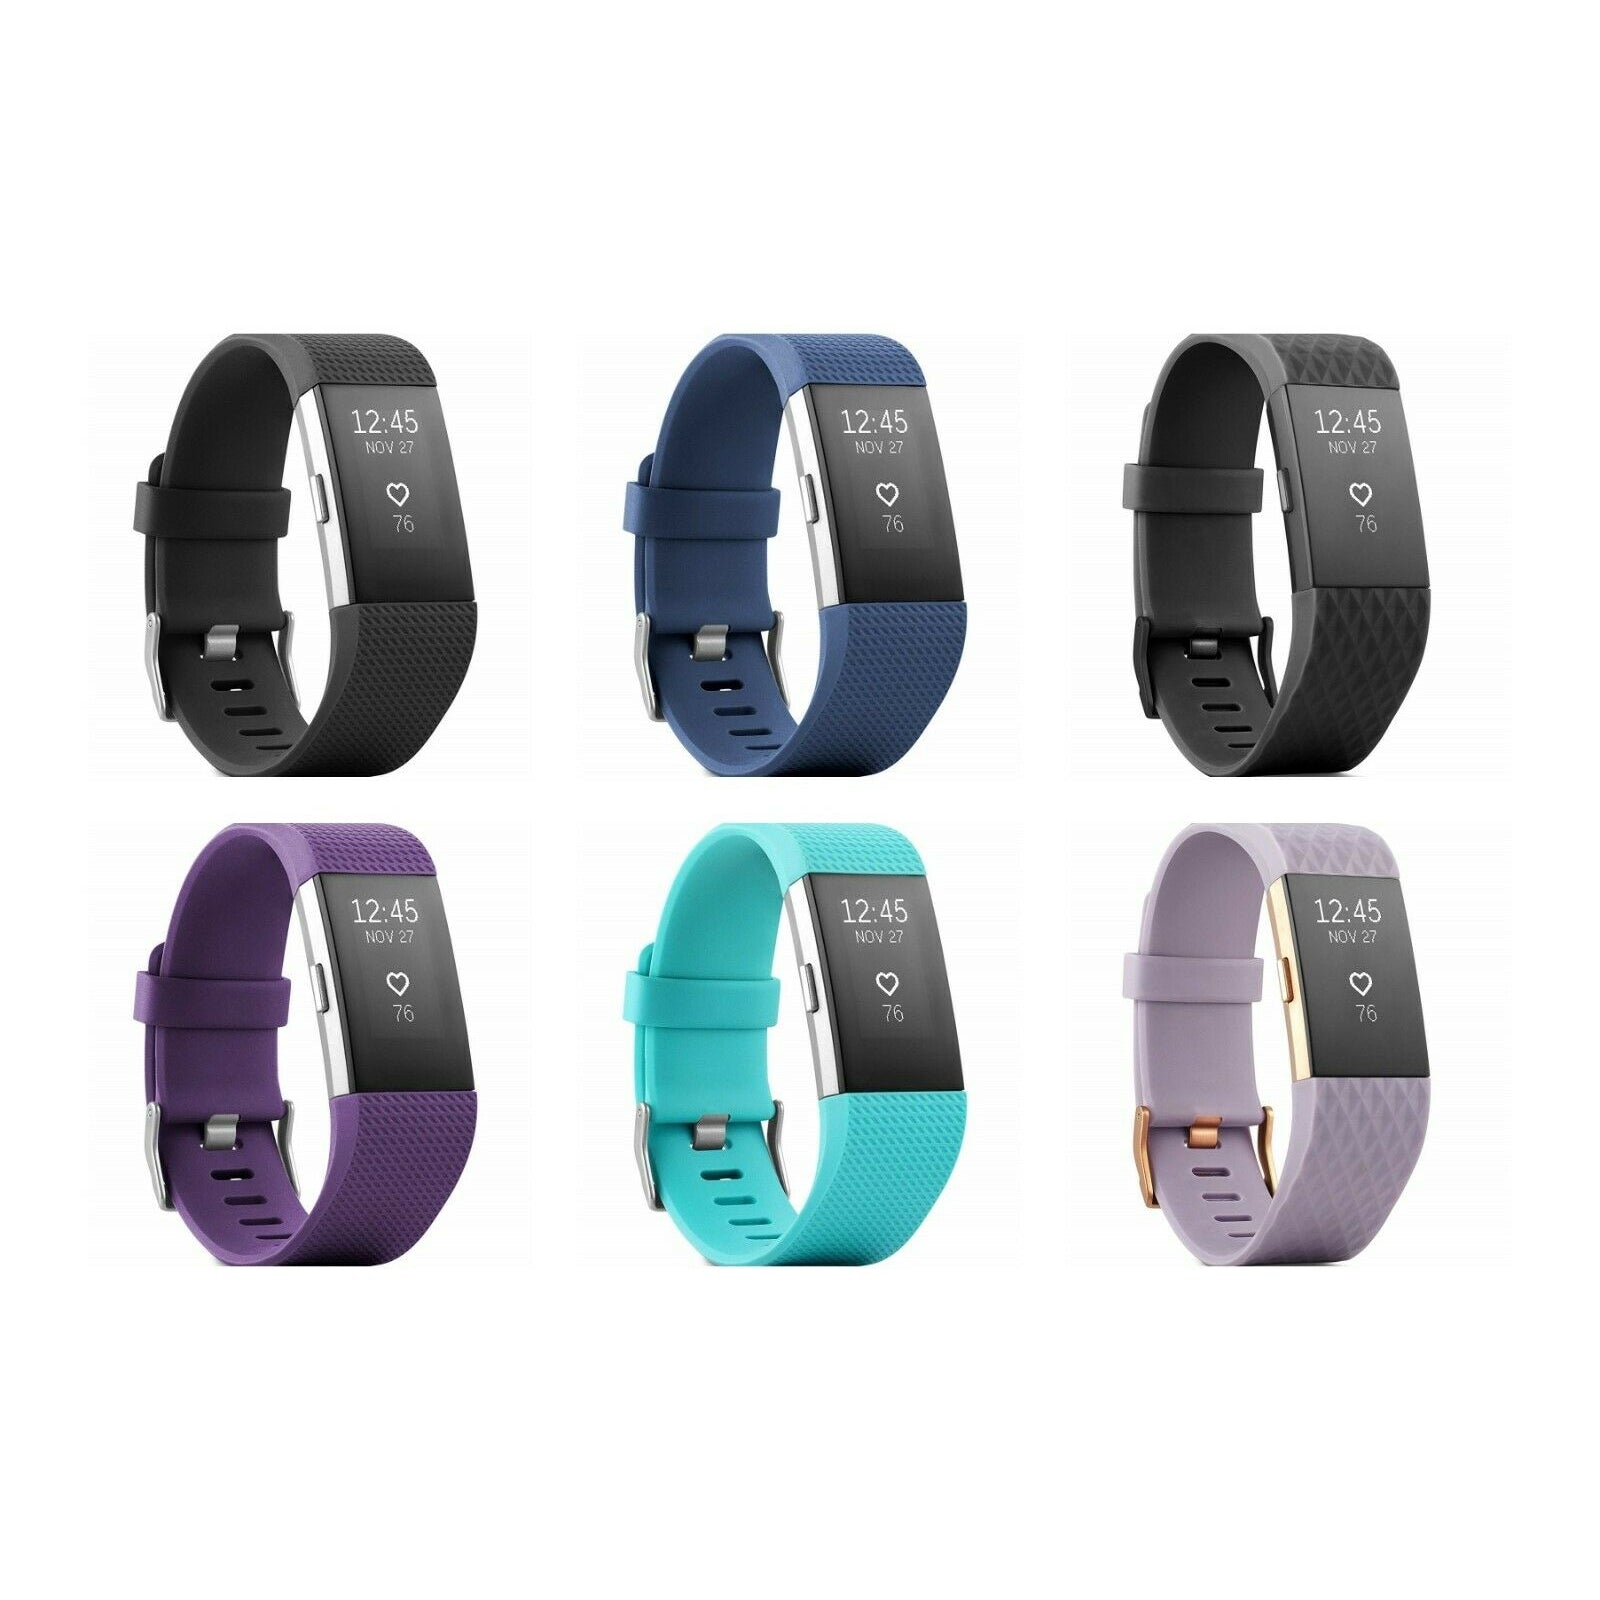 Fitbit Charge 2 Rate + Fitness Wristband All Colours